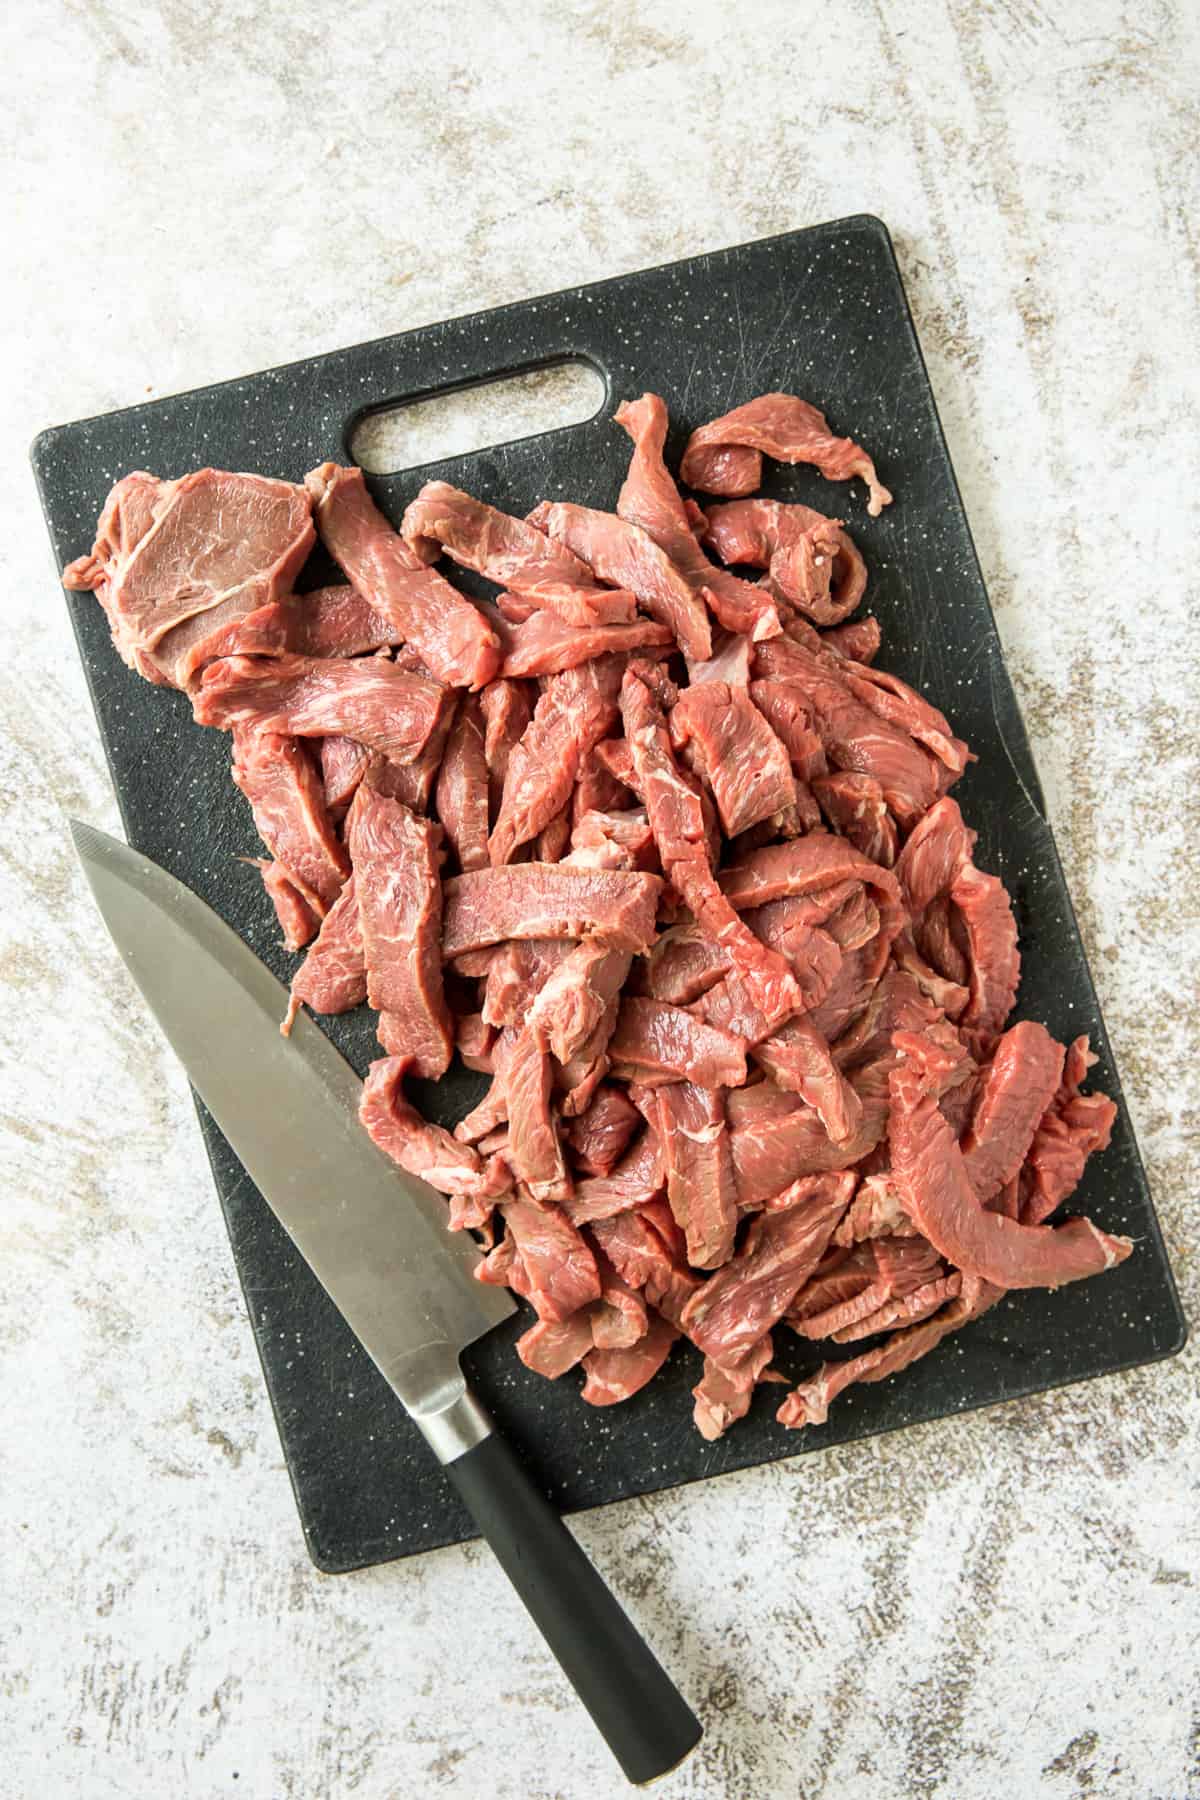 Thin strips of sirloin steak on a cutting board with a knife.